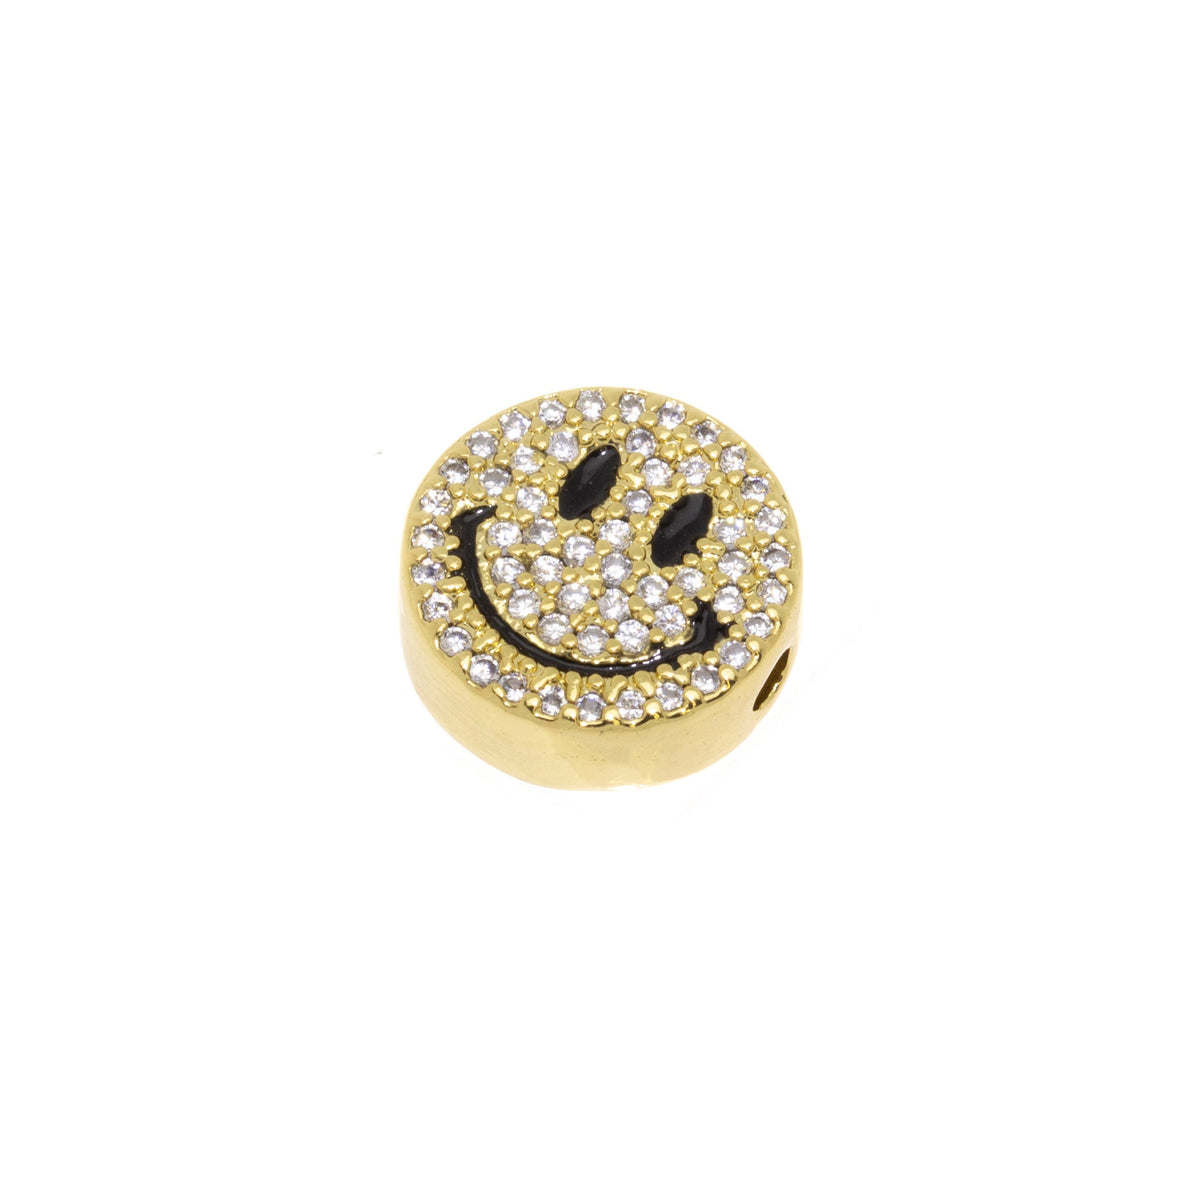 Happy Face Spacer Bead For Bracelet Or Necklace,Two Sided Pave Happy Face Gold Spacer Bead,Elastic Cord Bracelet Bead,SPG005